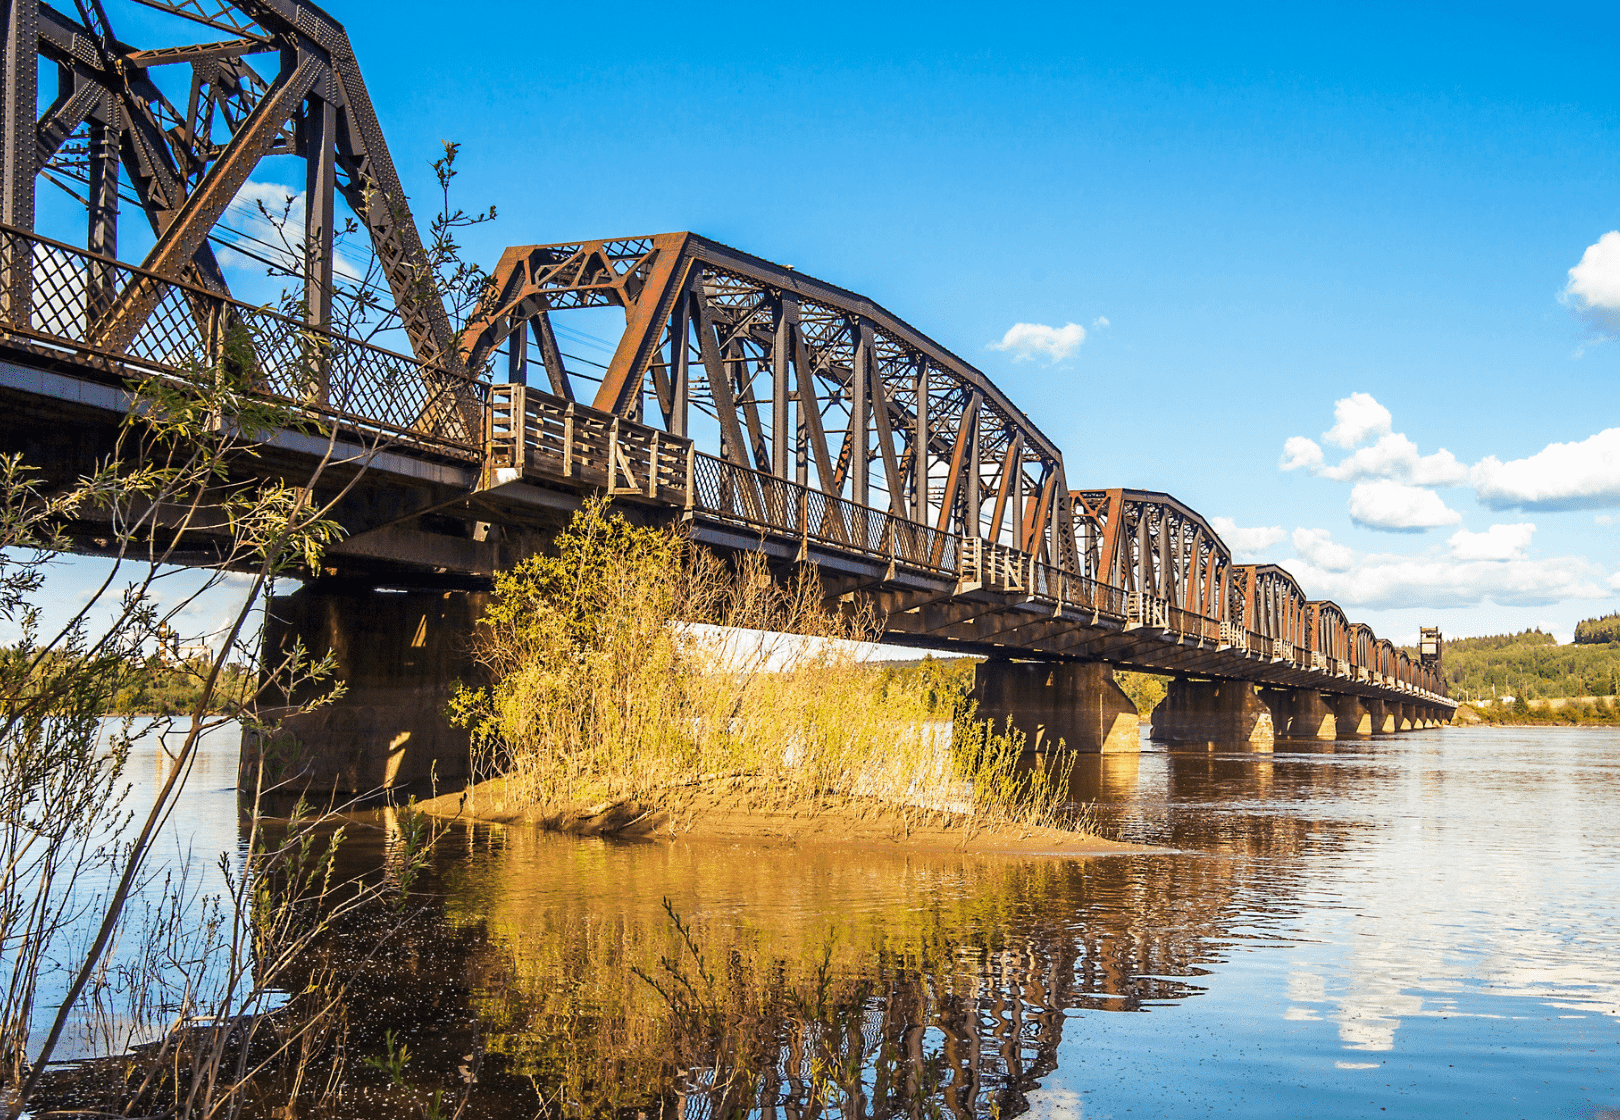 Railway bridge over the Fraser River in Prince George